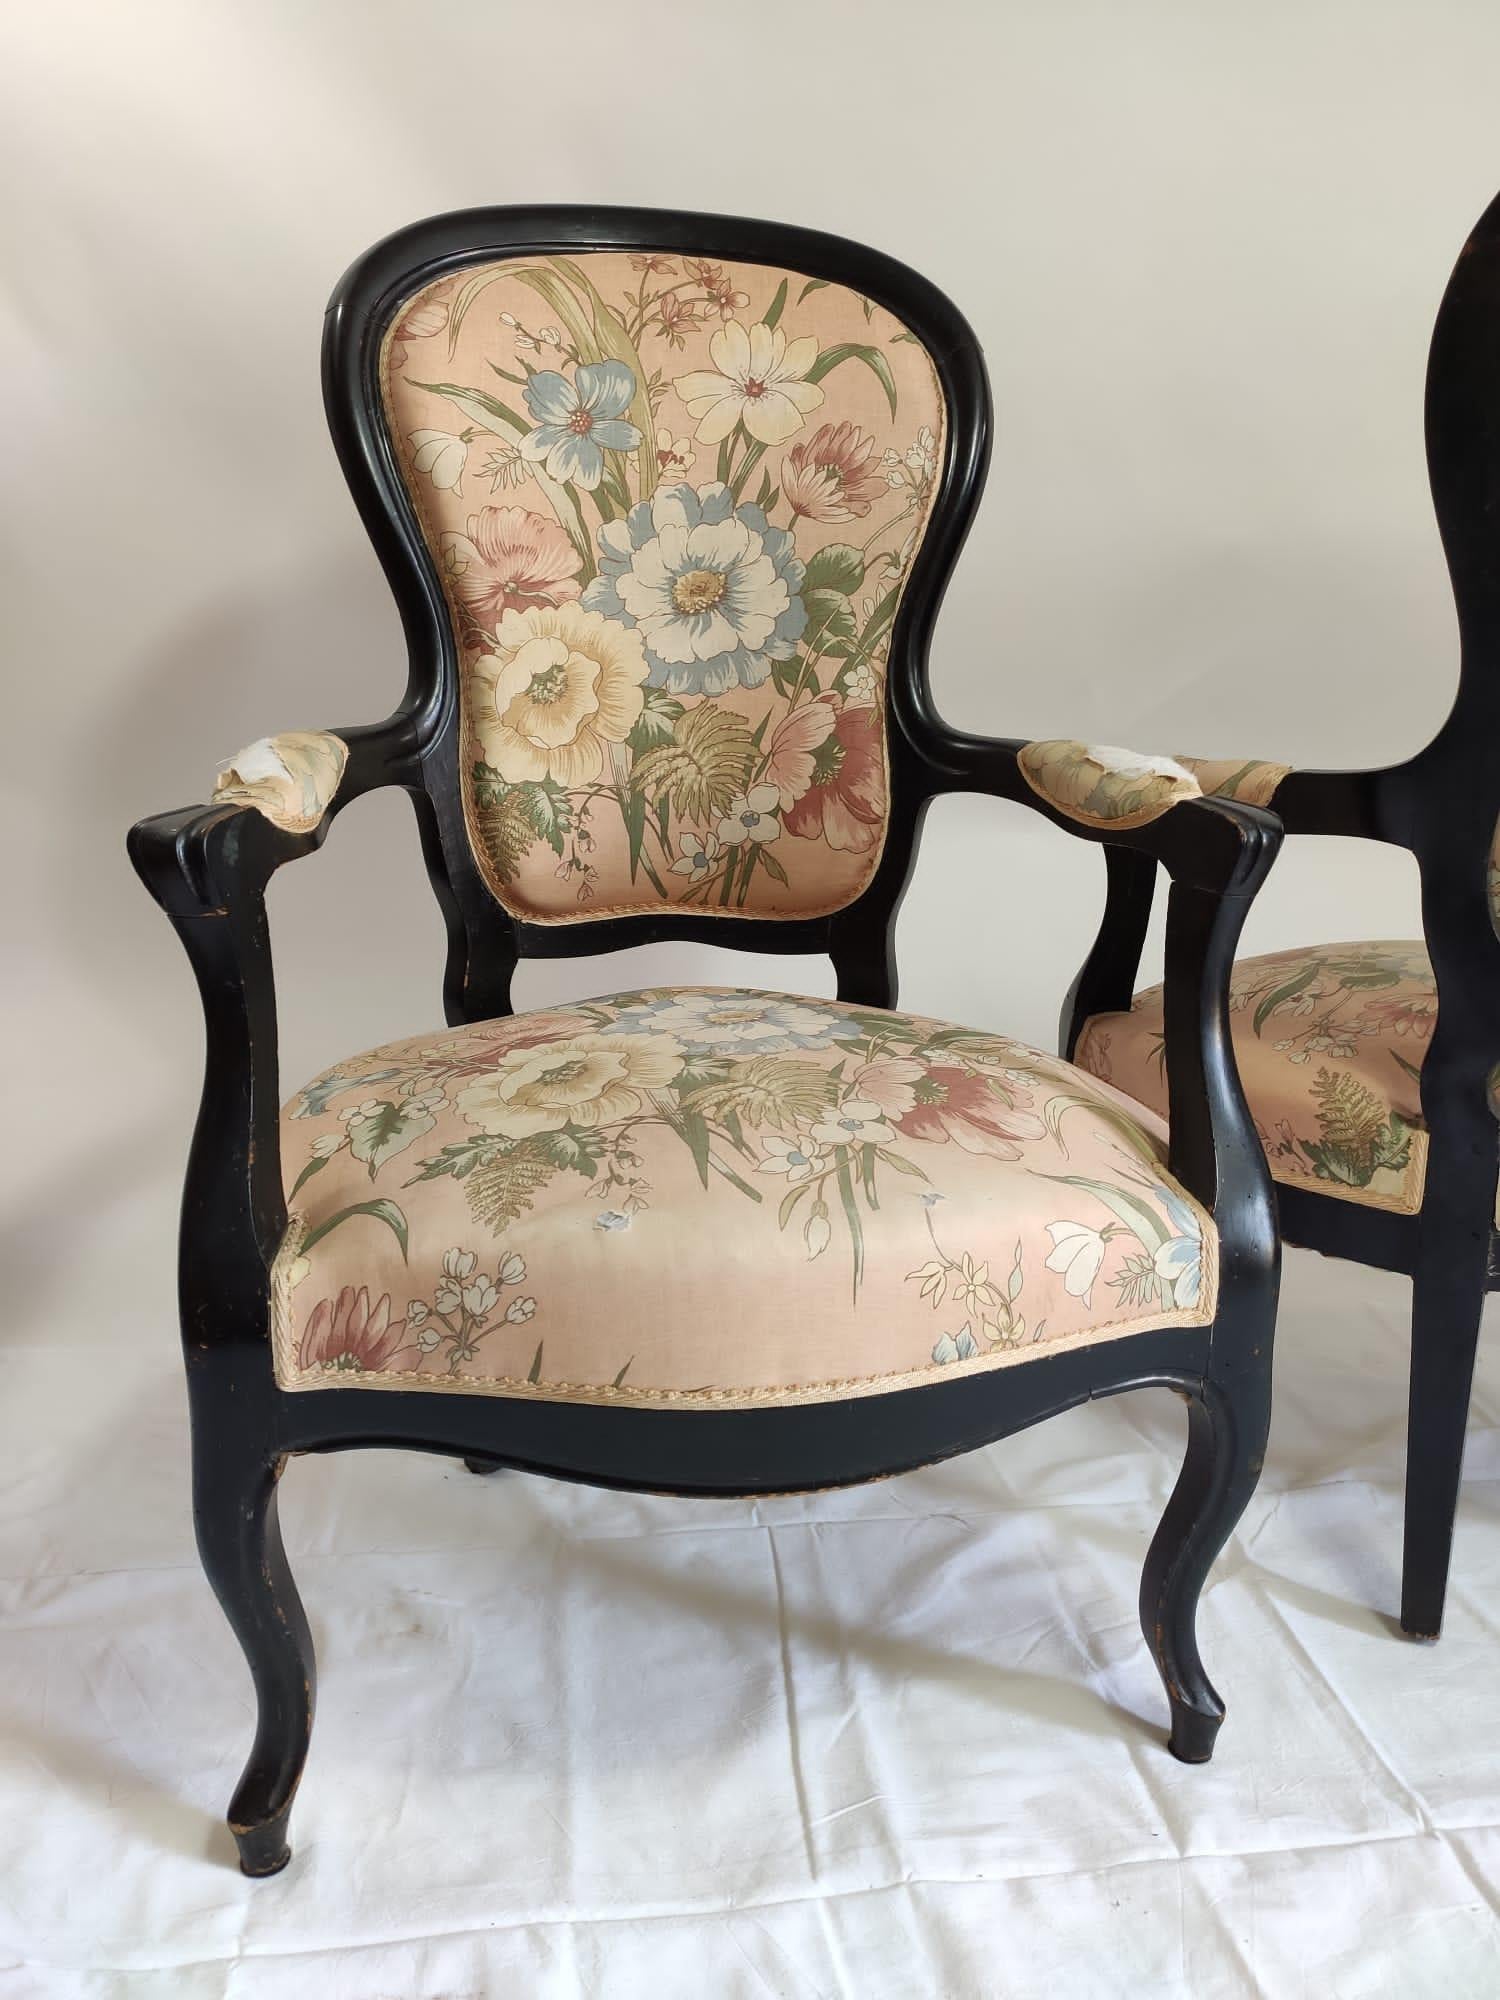 Two Armchairs, Black Wood, Napoléon III Period - 2nd Half of the Nineteenth In Good Condition For Sale In LES LILAS, FR